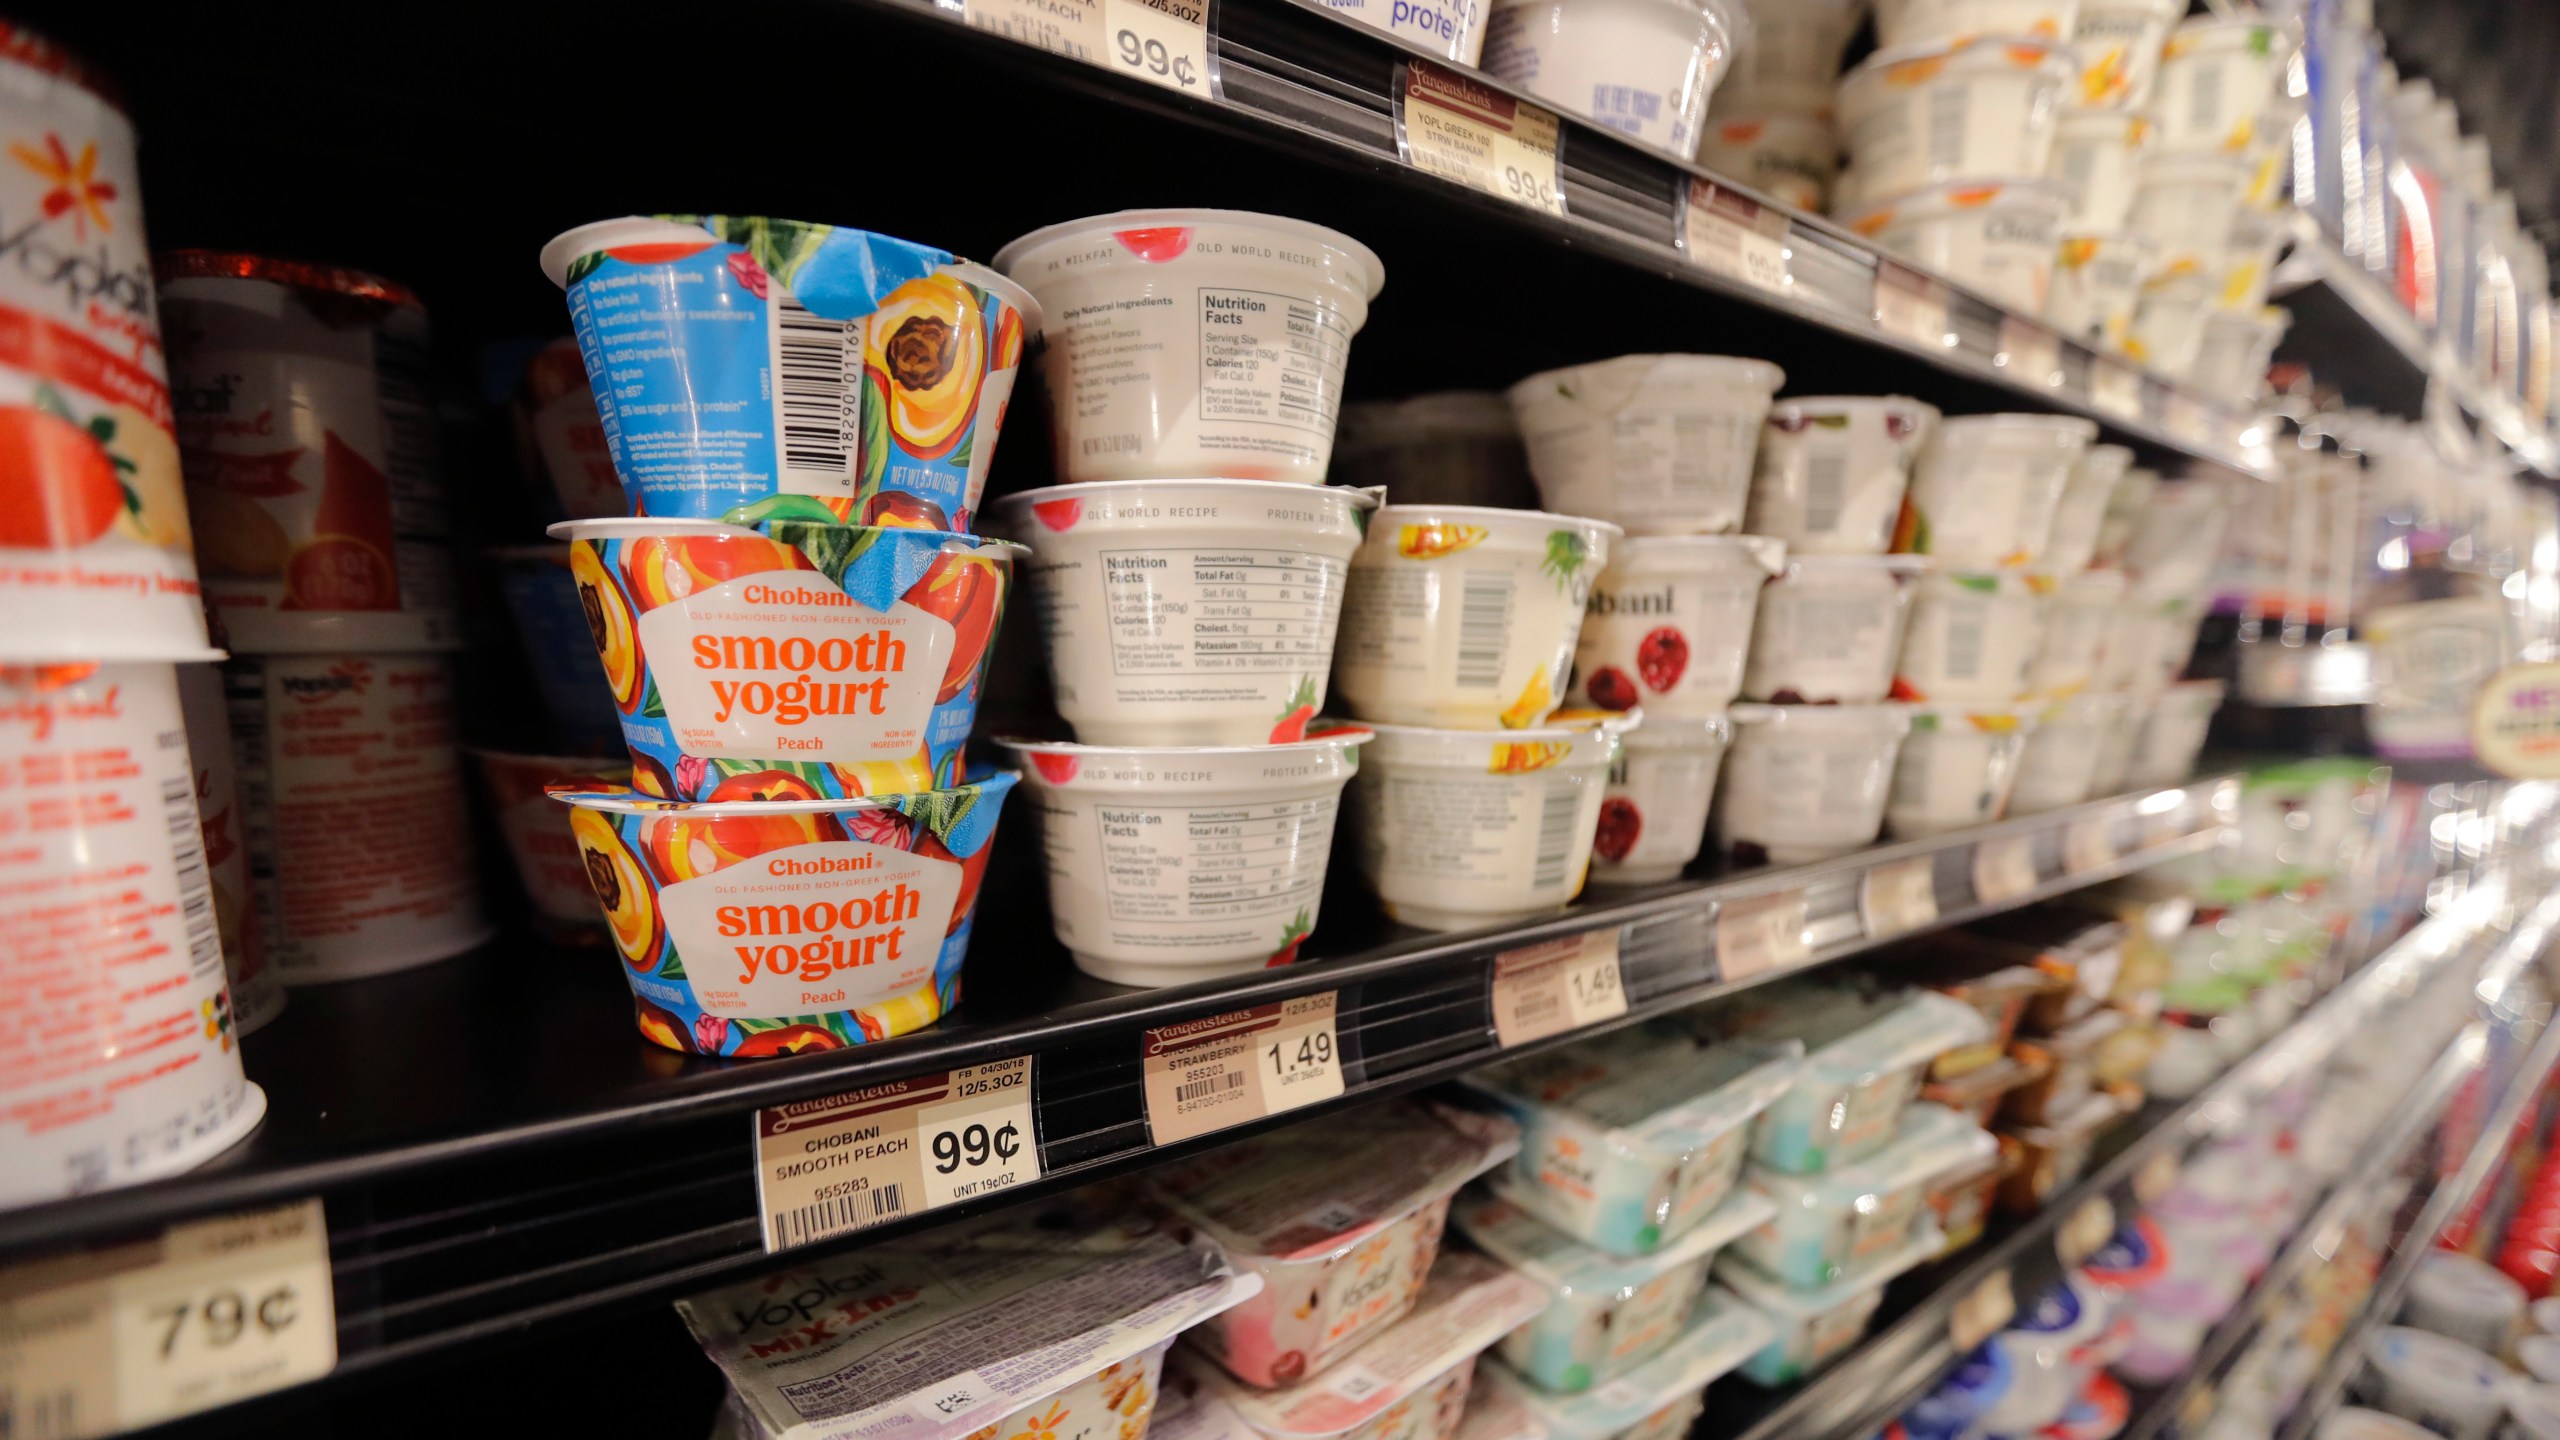 FILE - Yogurt is displayed for sale at a grocery store in River Ridge, La. on July 11, 2018. Yogurt sold in U.S. grocery store may soon have new labels that say the popular food might help reduce the risk of Type 2 diabetes. (AP Photo/Gerald Herbert, File)